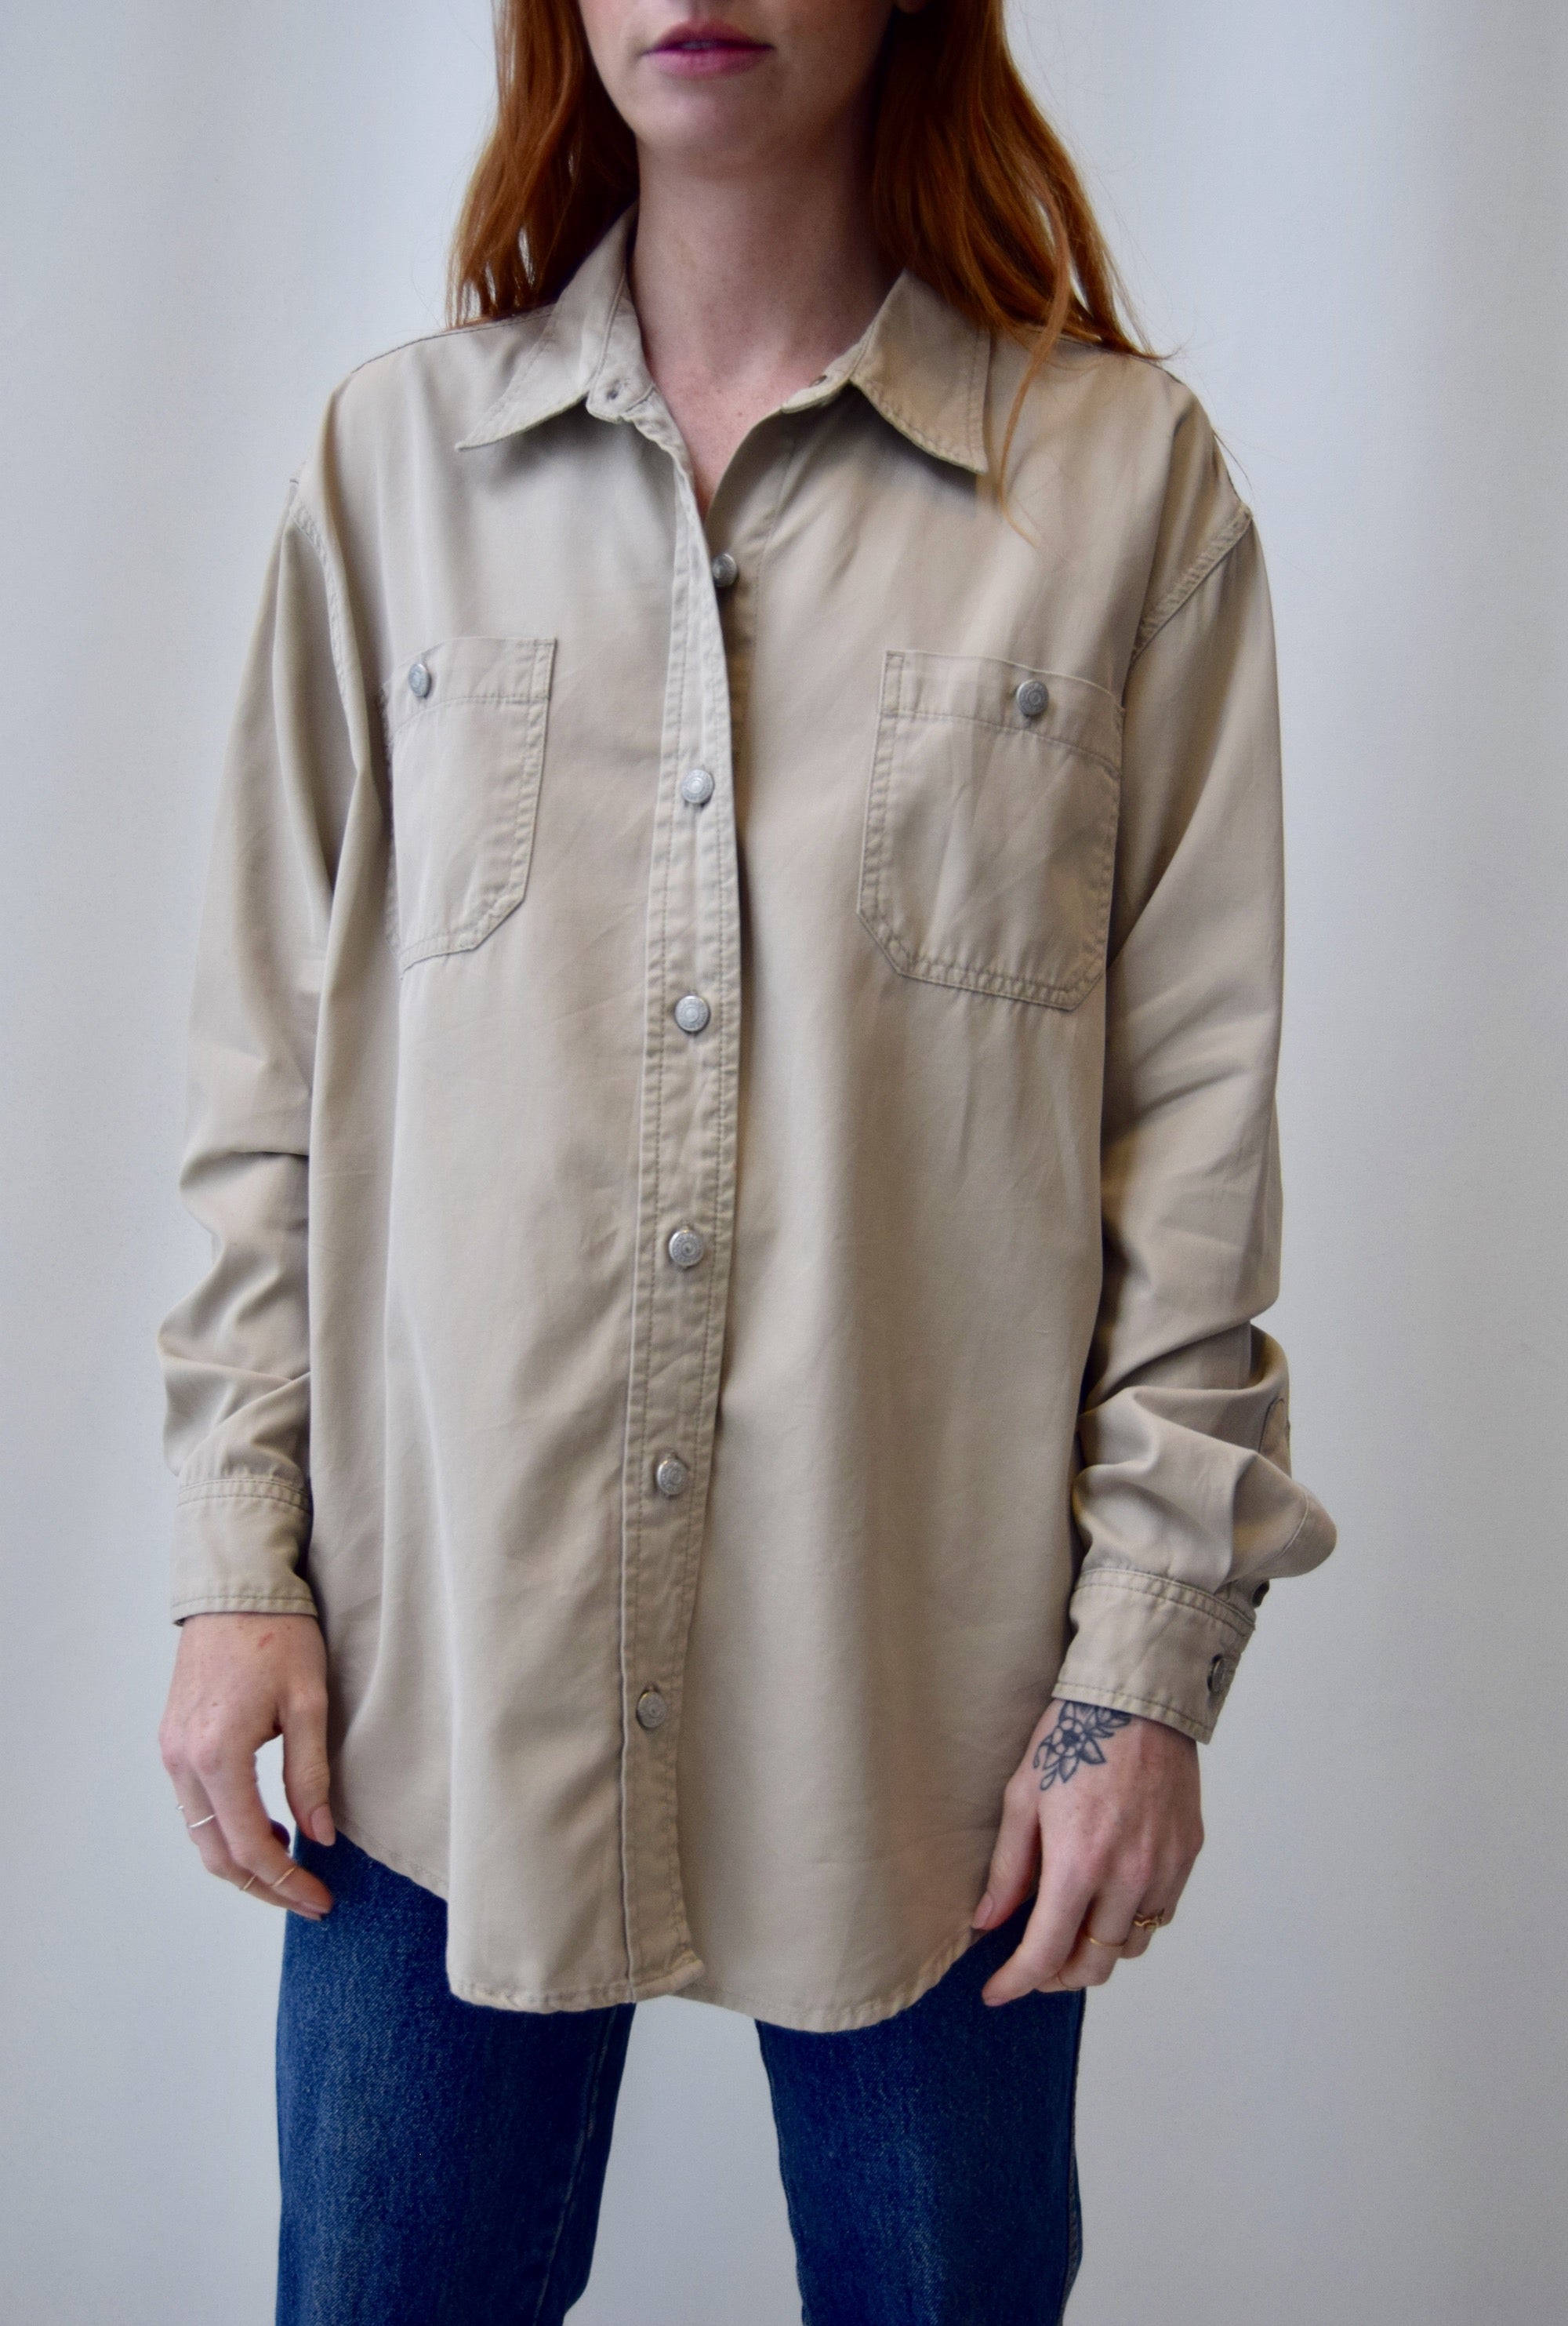 DKNY Jeans Tan Work Button Up